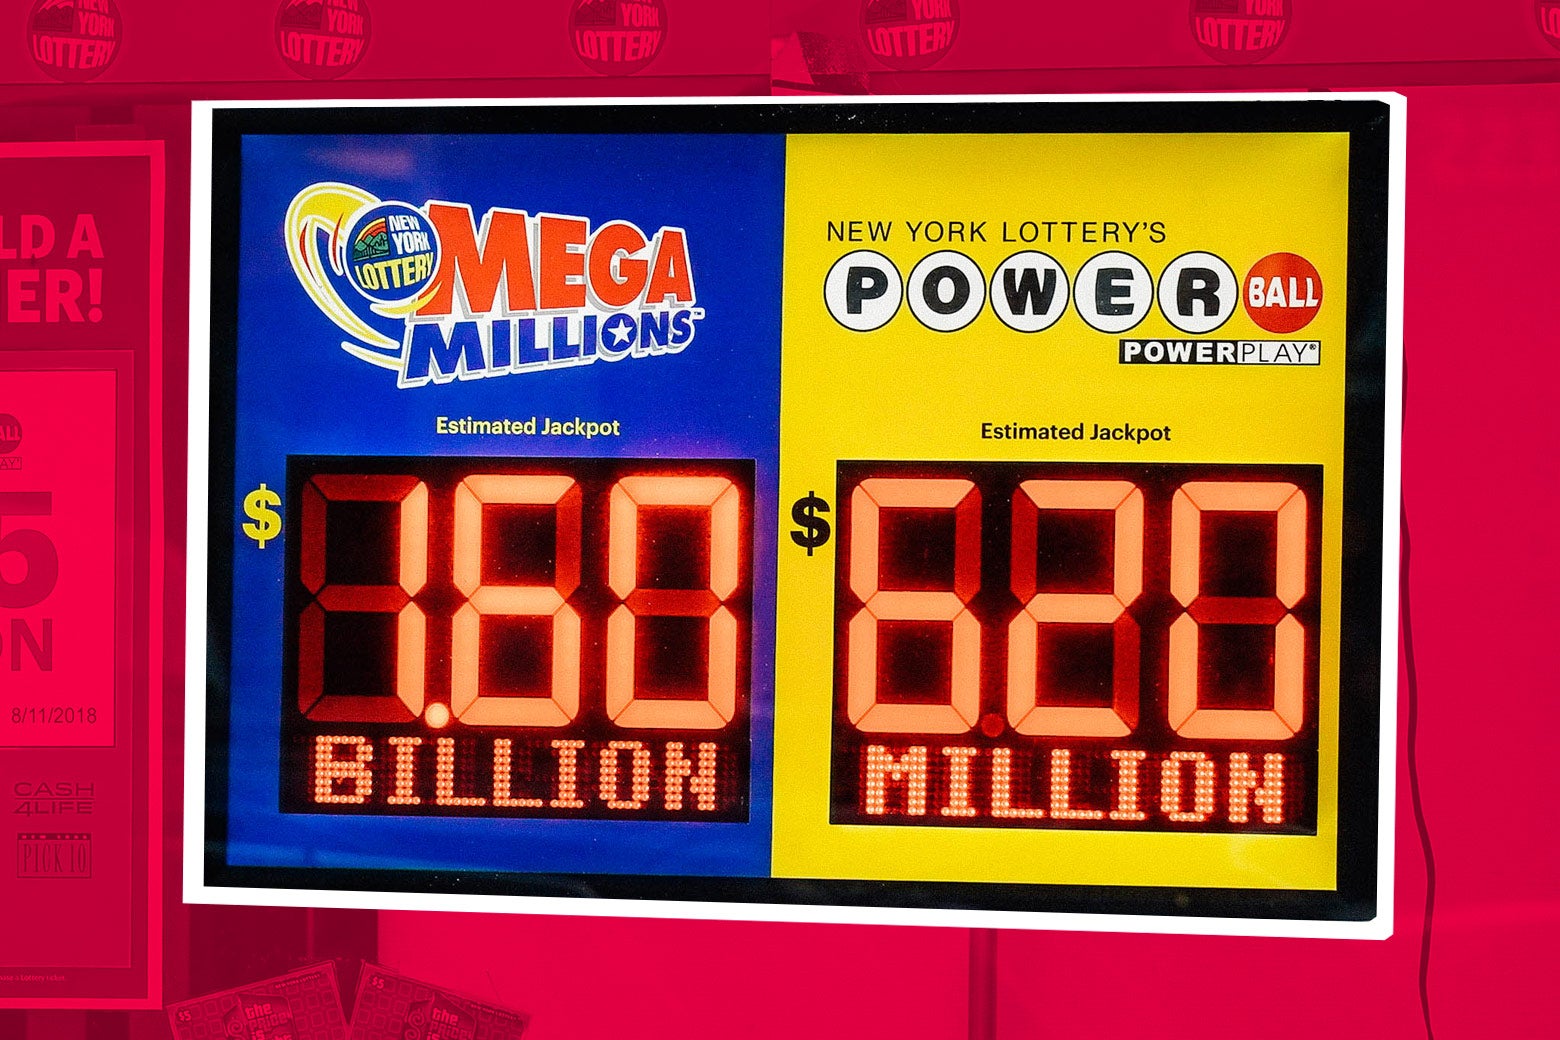 Mega Millions and Powerball tickets side by side.